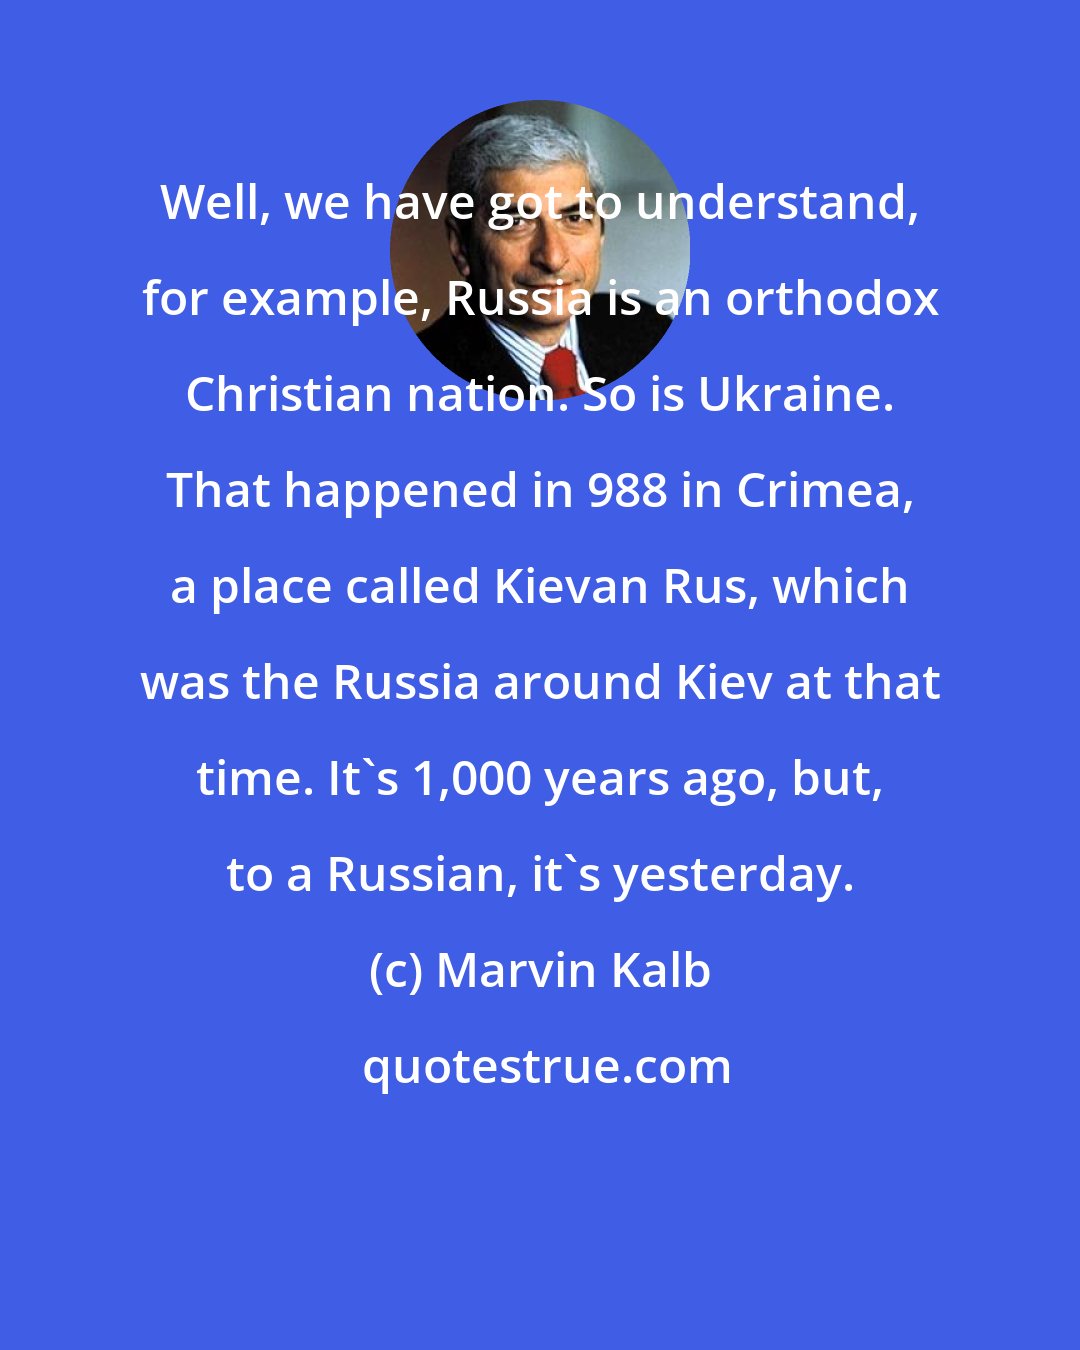 Marvin Kalb: Well, we have got to understand, for example, Russia is an orthodox Christian nation. So is Ukraine. That happened in 988 in Crimea, a place called Kievan Rus, which was the Russia around Kiev at that time. It's 1,000 years ago, but, to a Russian, it's yesterday.